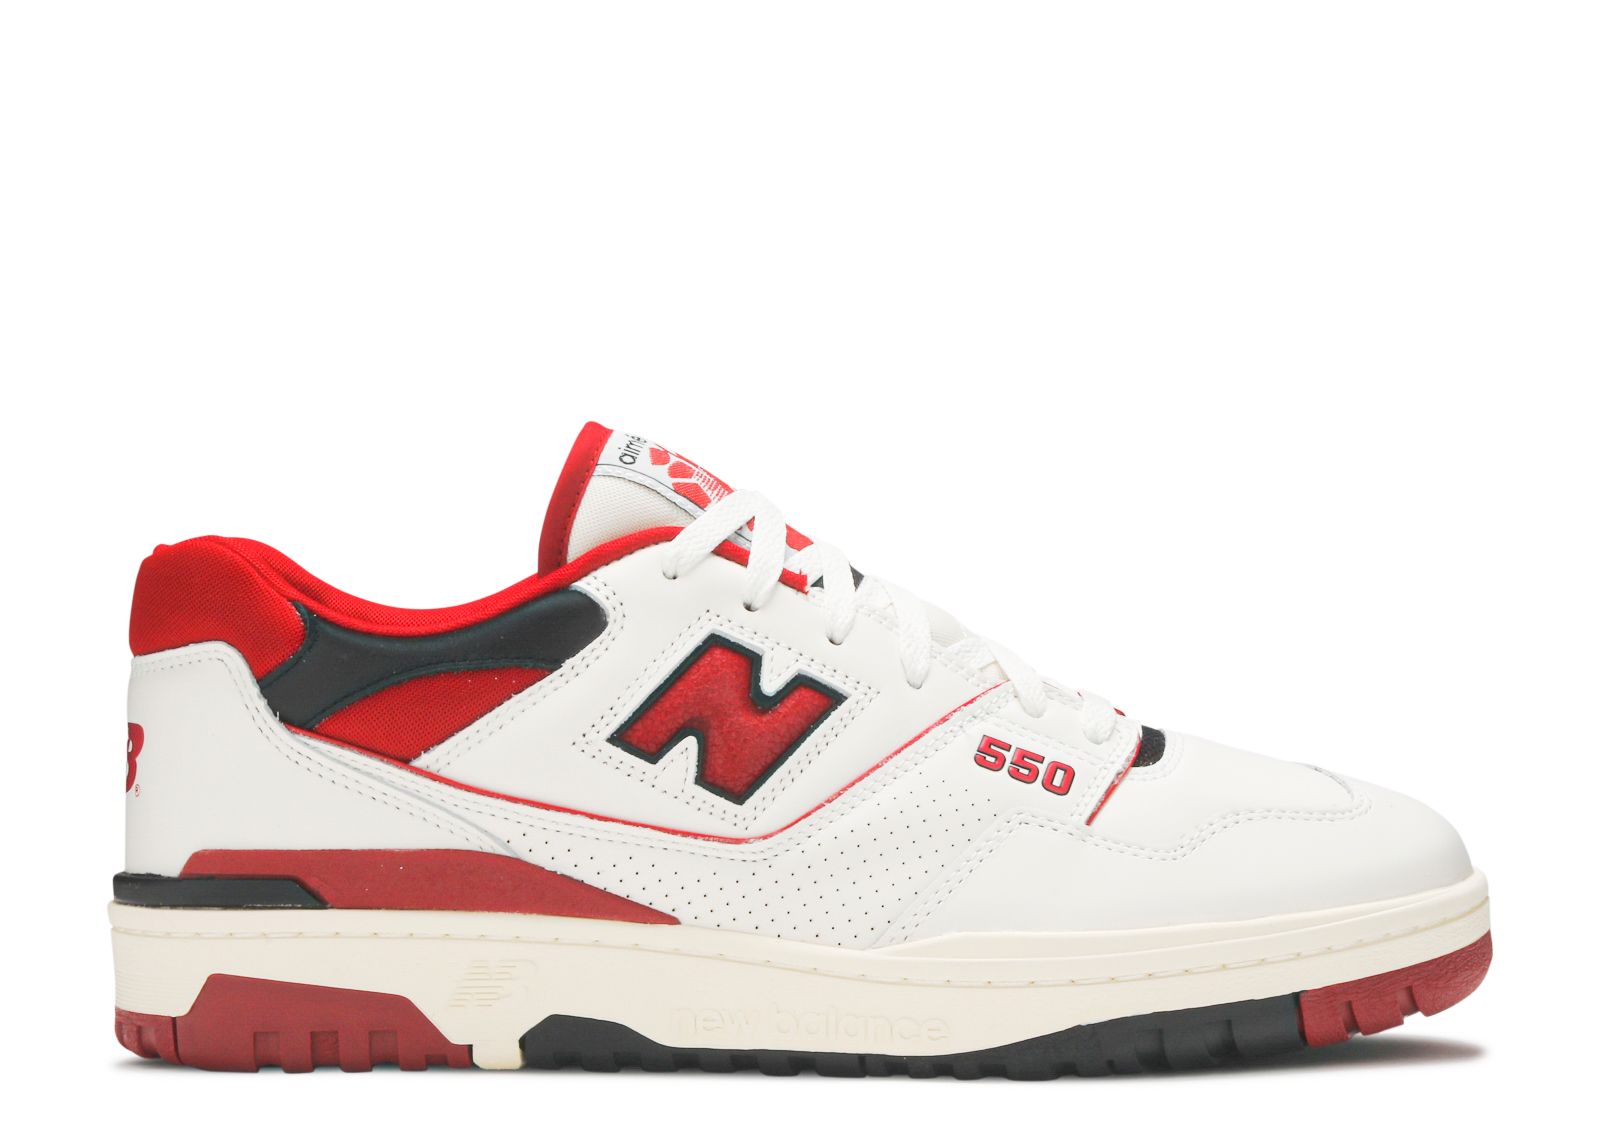 Aime new balance. New Balance 550. New Balance NB 550. New Balance 550 White Red. New Balance 550 aime Leon Dore White Red.